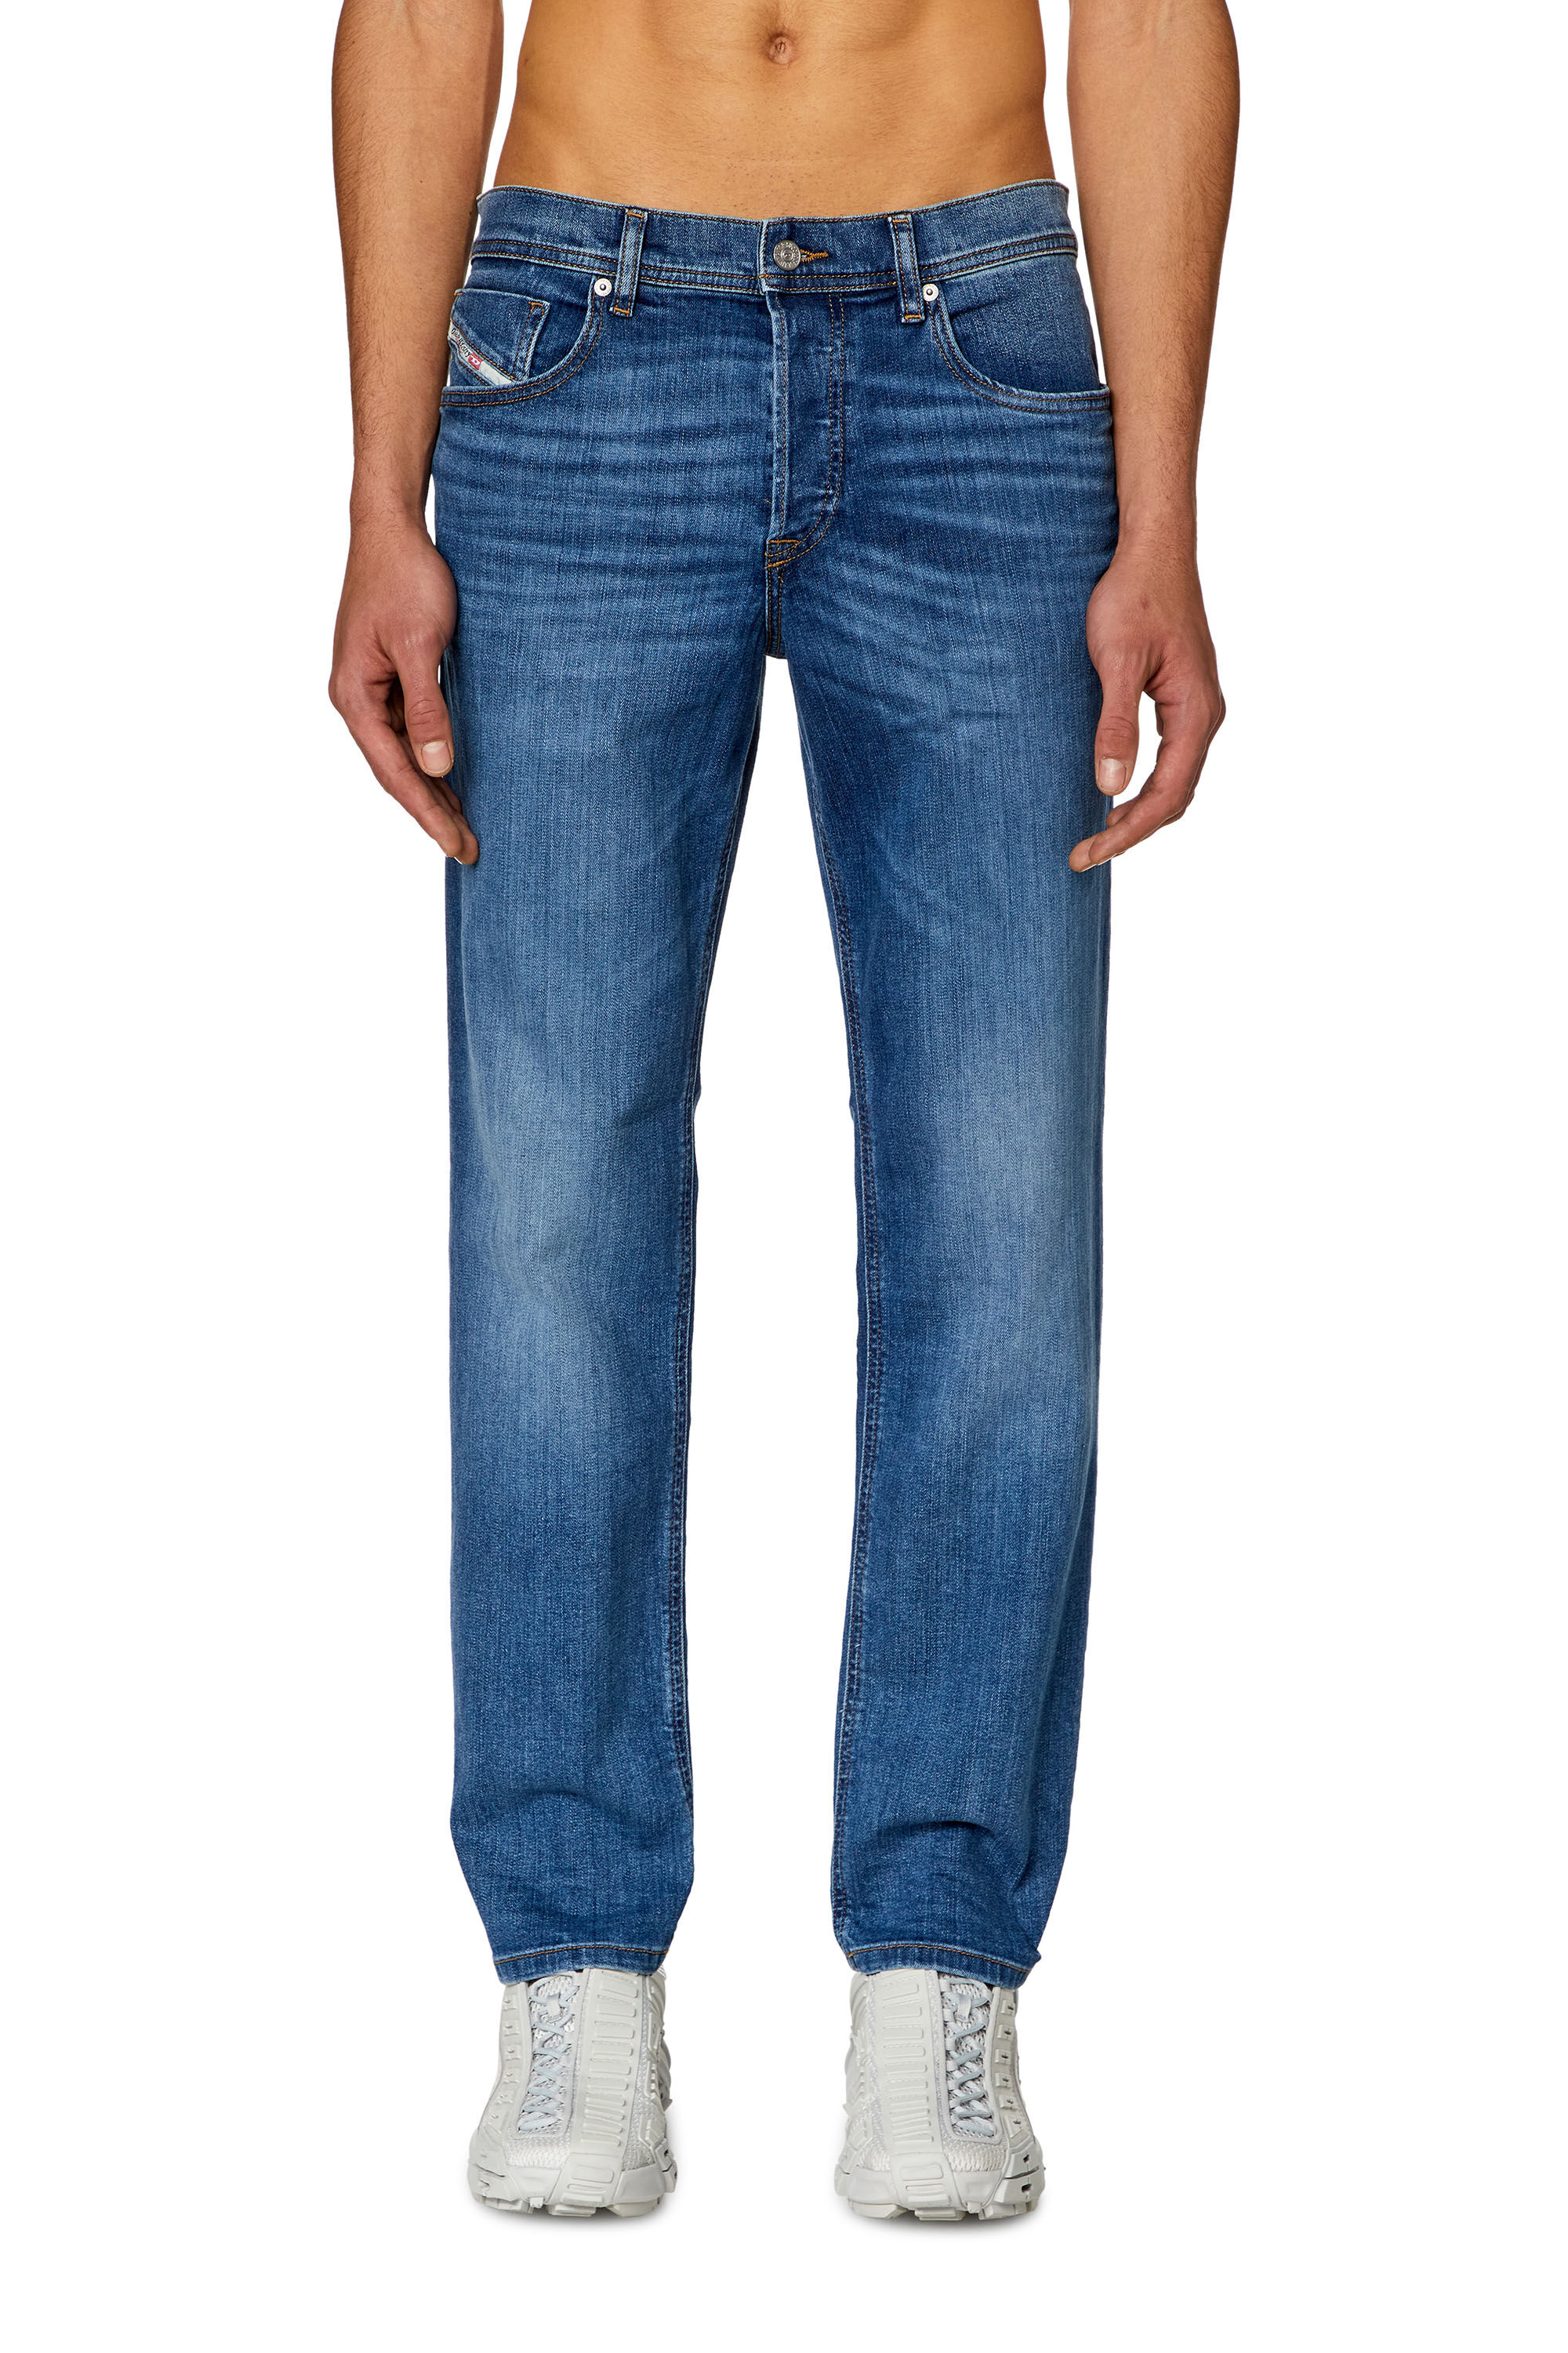 Diesel - Tapered Jeans 2023 D-Finitive 0KIAL, Hombre Tapered Jeans - 2023 D-Finitive in Azul marino - Image 2